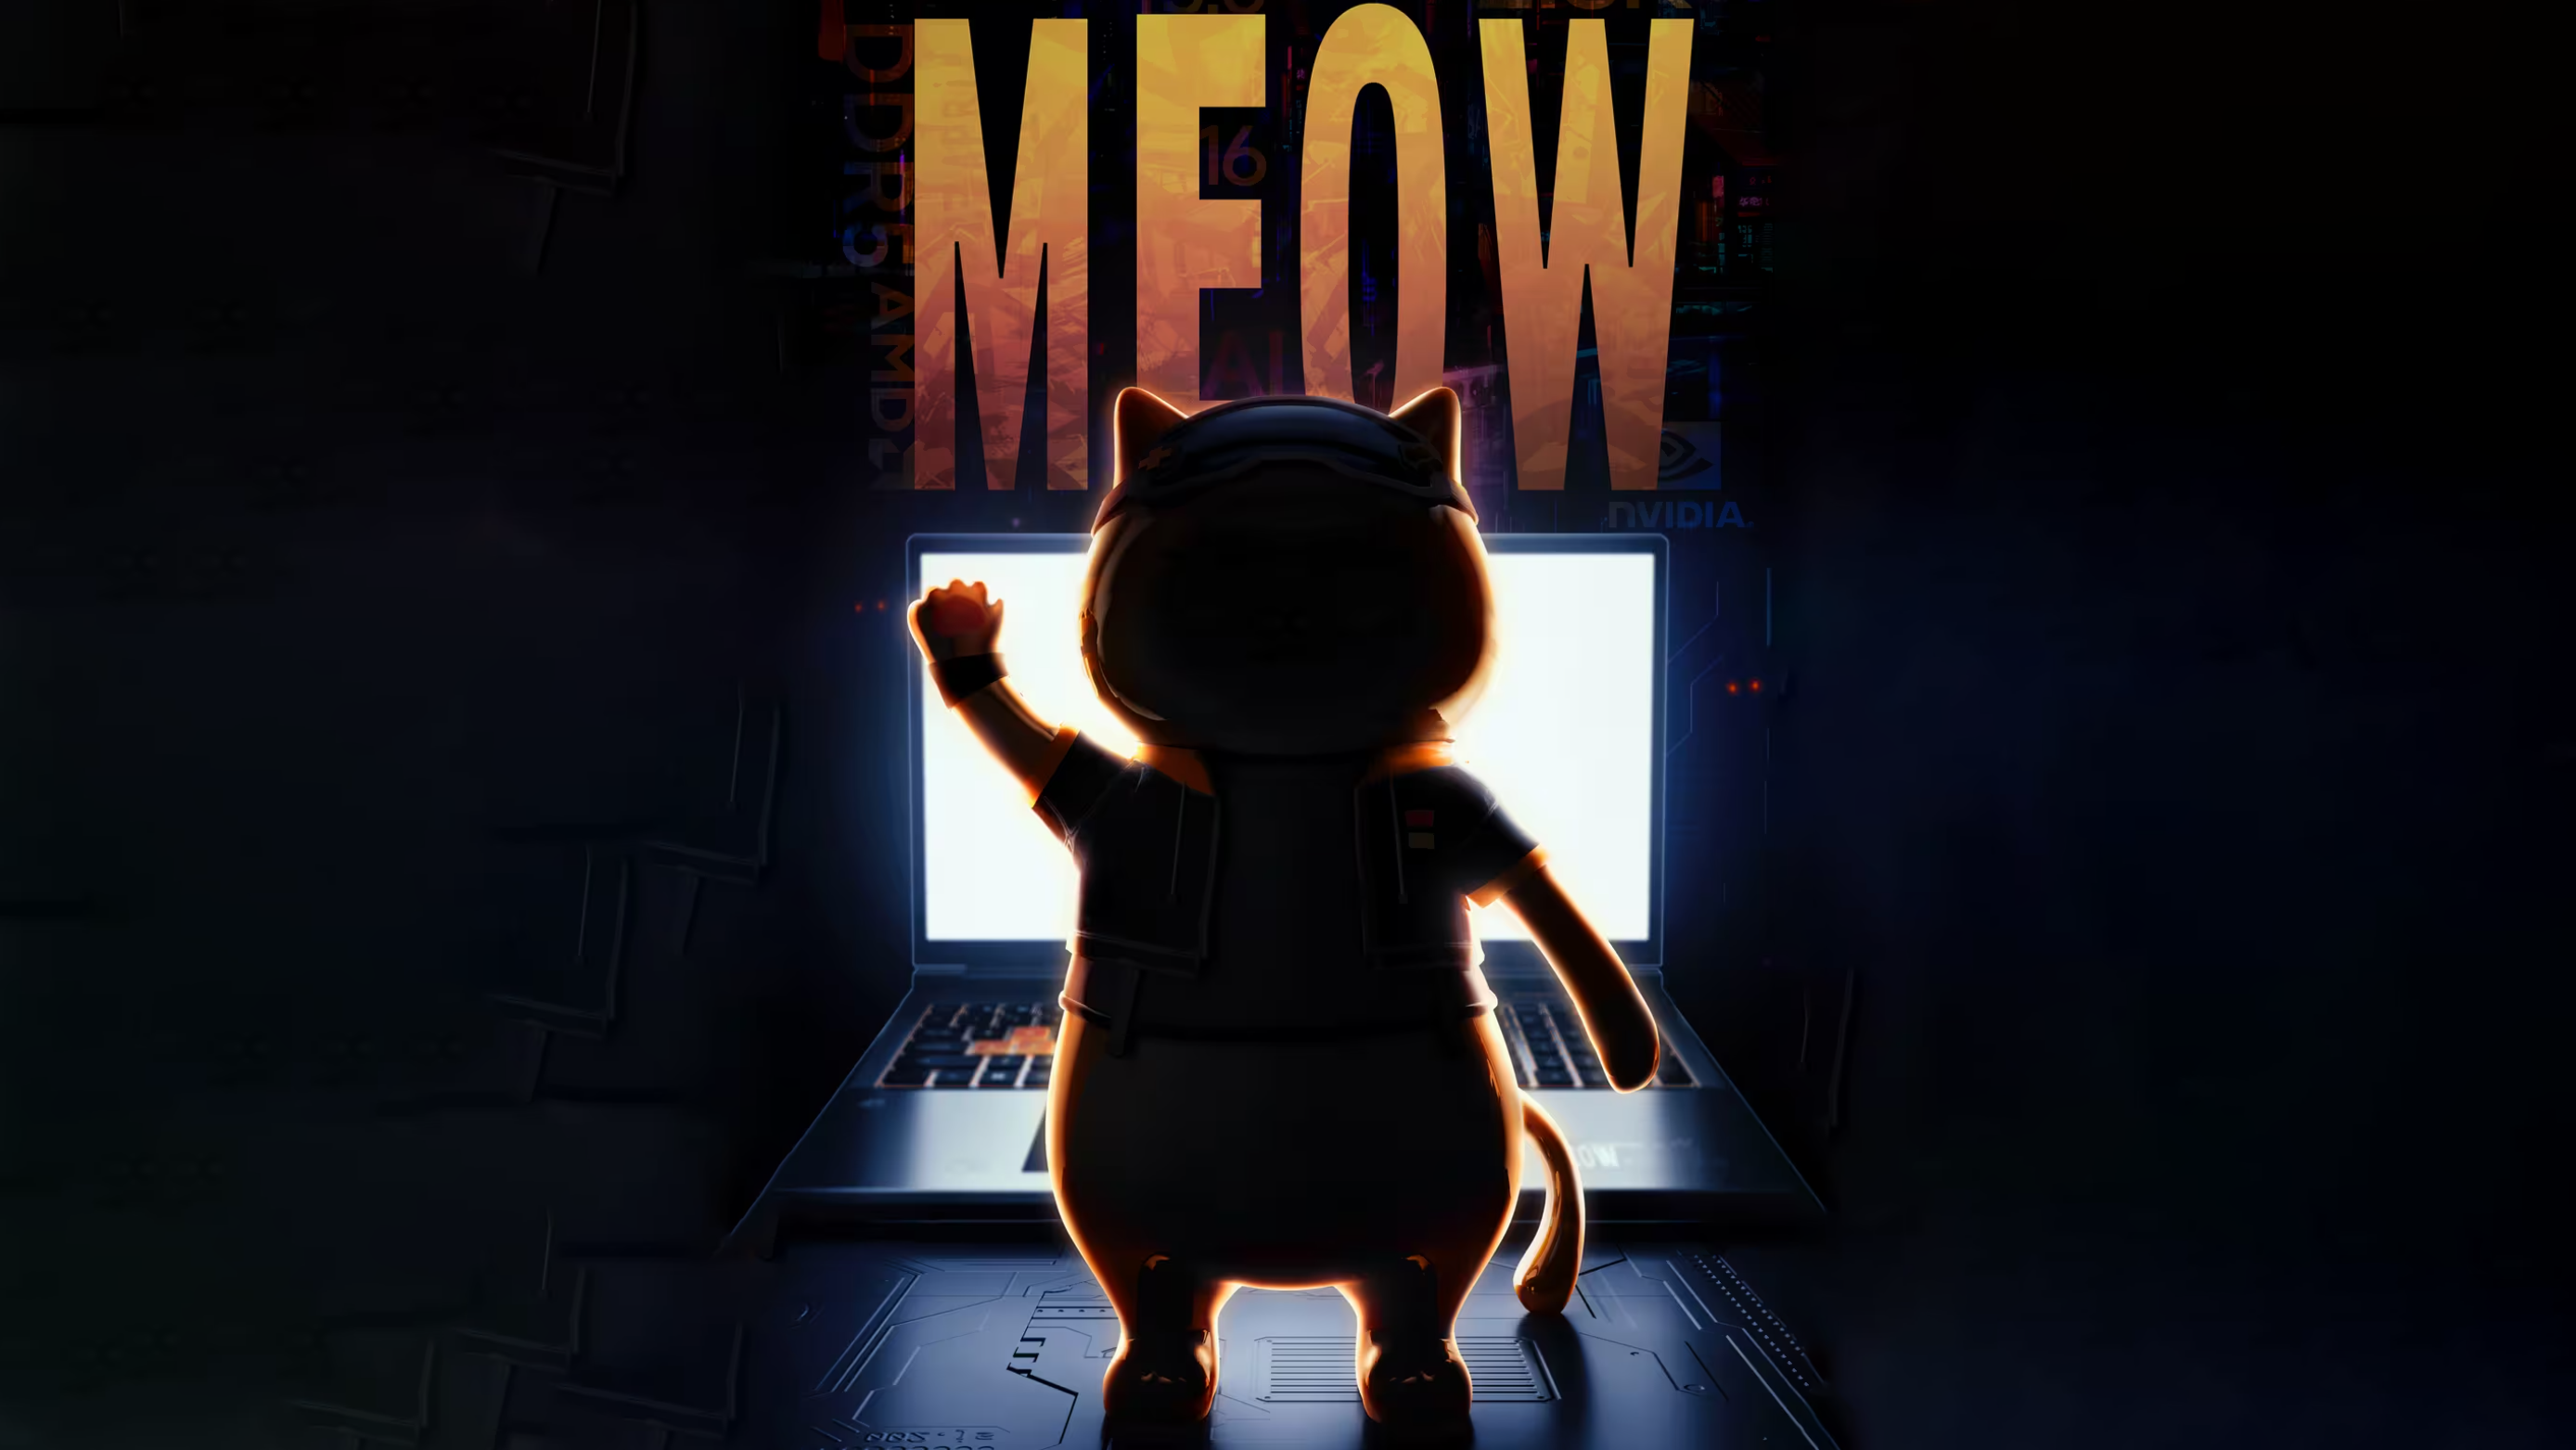 You are currently viewing Colorful представляет линейку ноутбуков "MEOW"